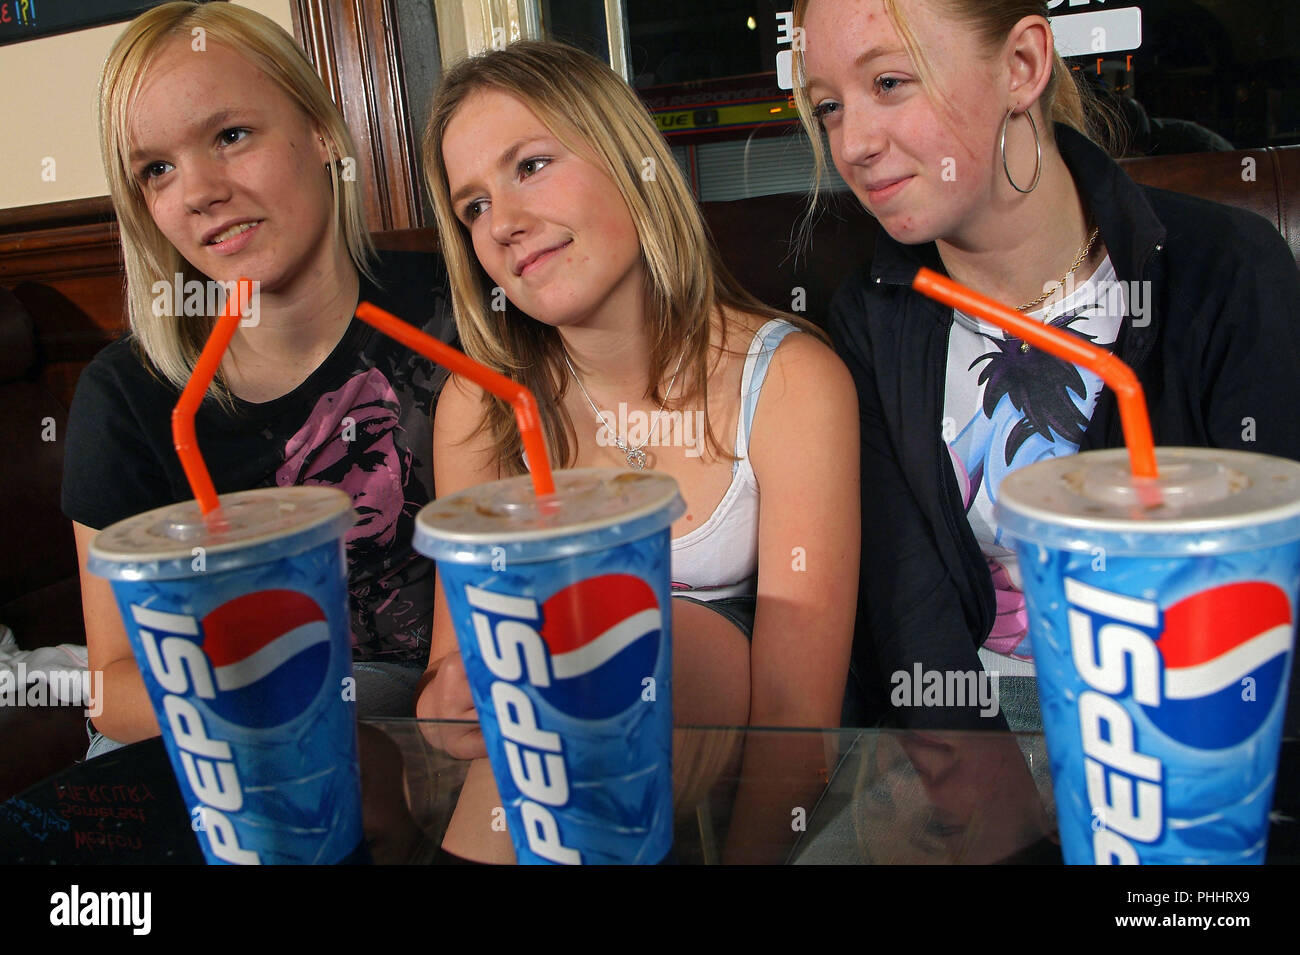 Adolescents drinking soft drinks at an alcohol-free bar in Weston-Super-Mare,Somerset,UK Stock Photo